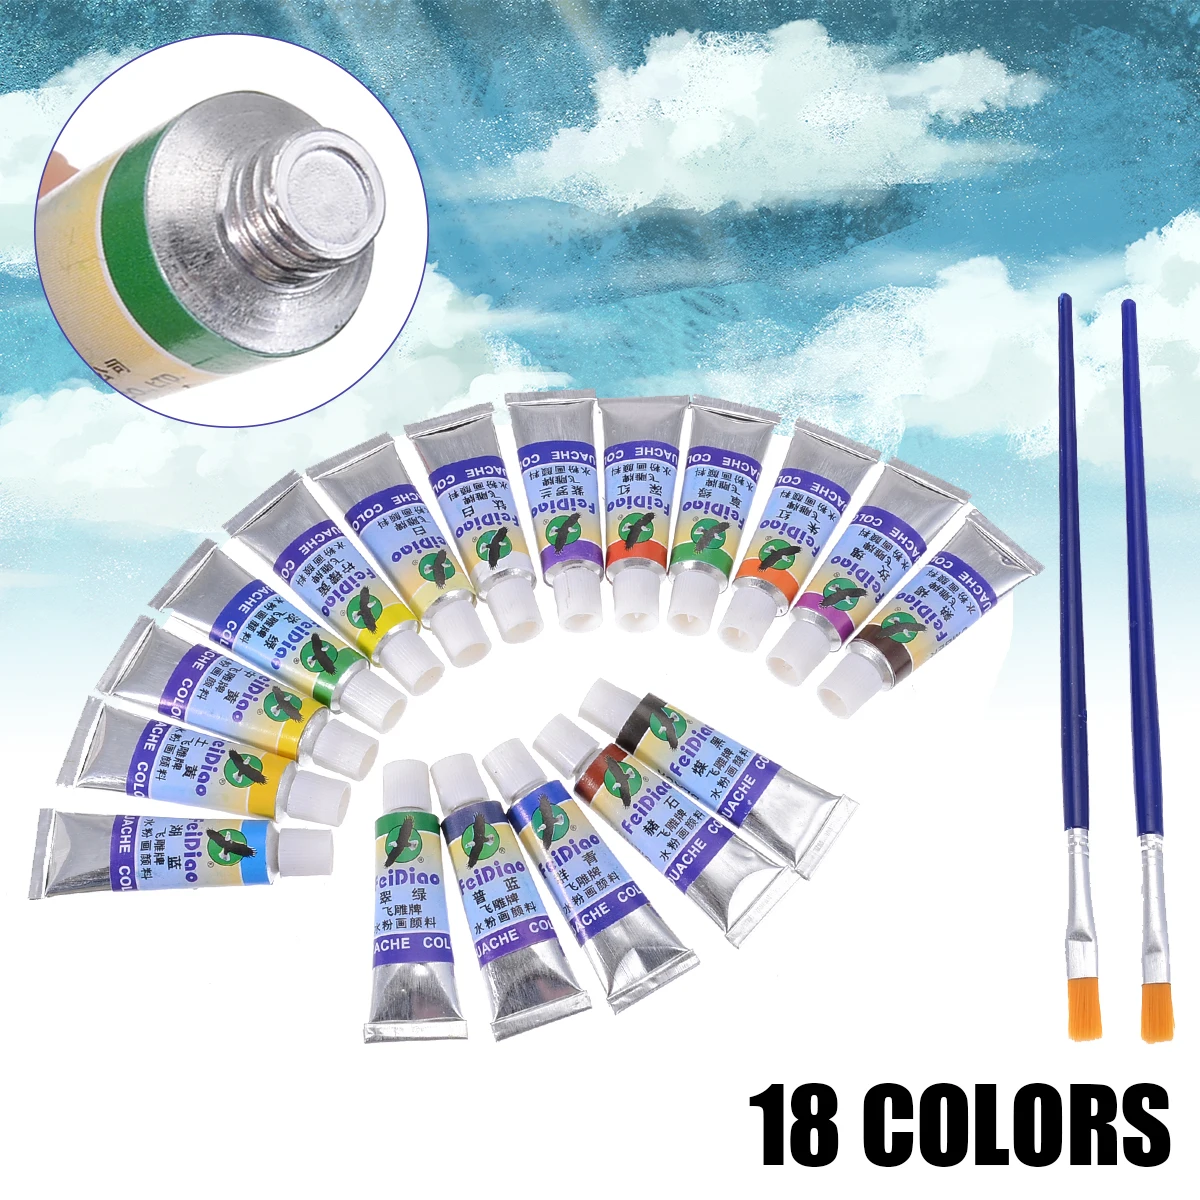 

5ml Watercolor Draw Tube Pigment Set 18 Colors Gouache Paint Tube DIY Artist Painting Graffiti Supplies With 2pcs Brushes